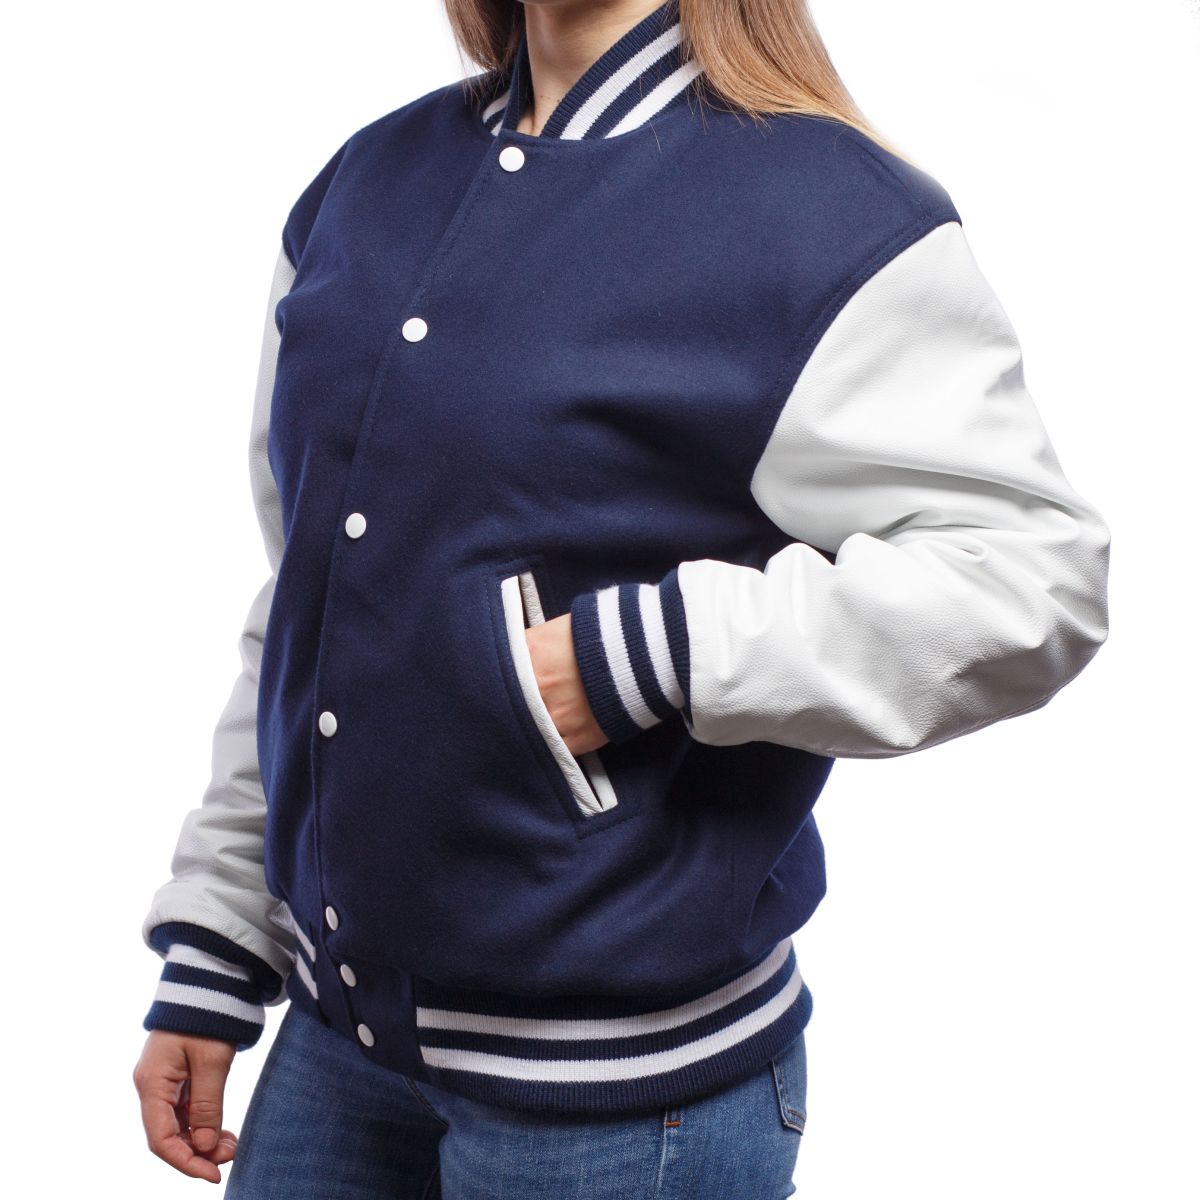 Navy Blue Letterman Jacket with White Leather Sleeves